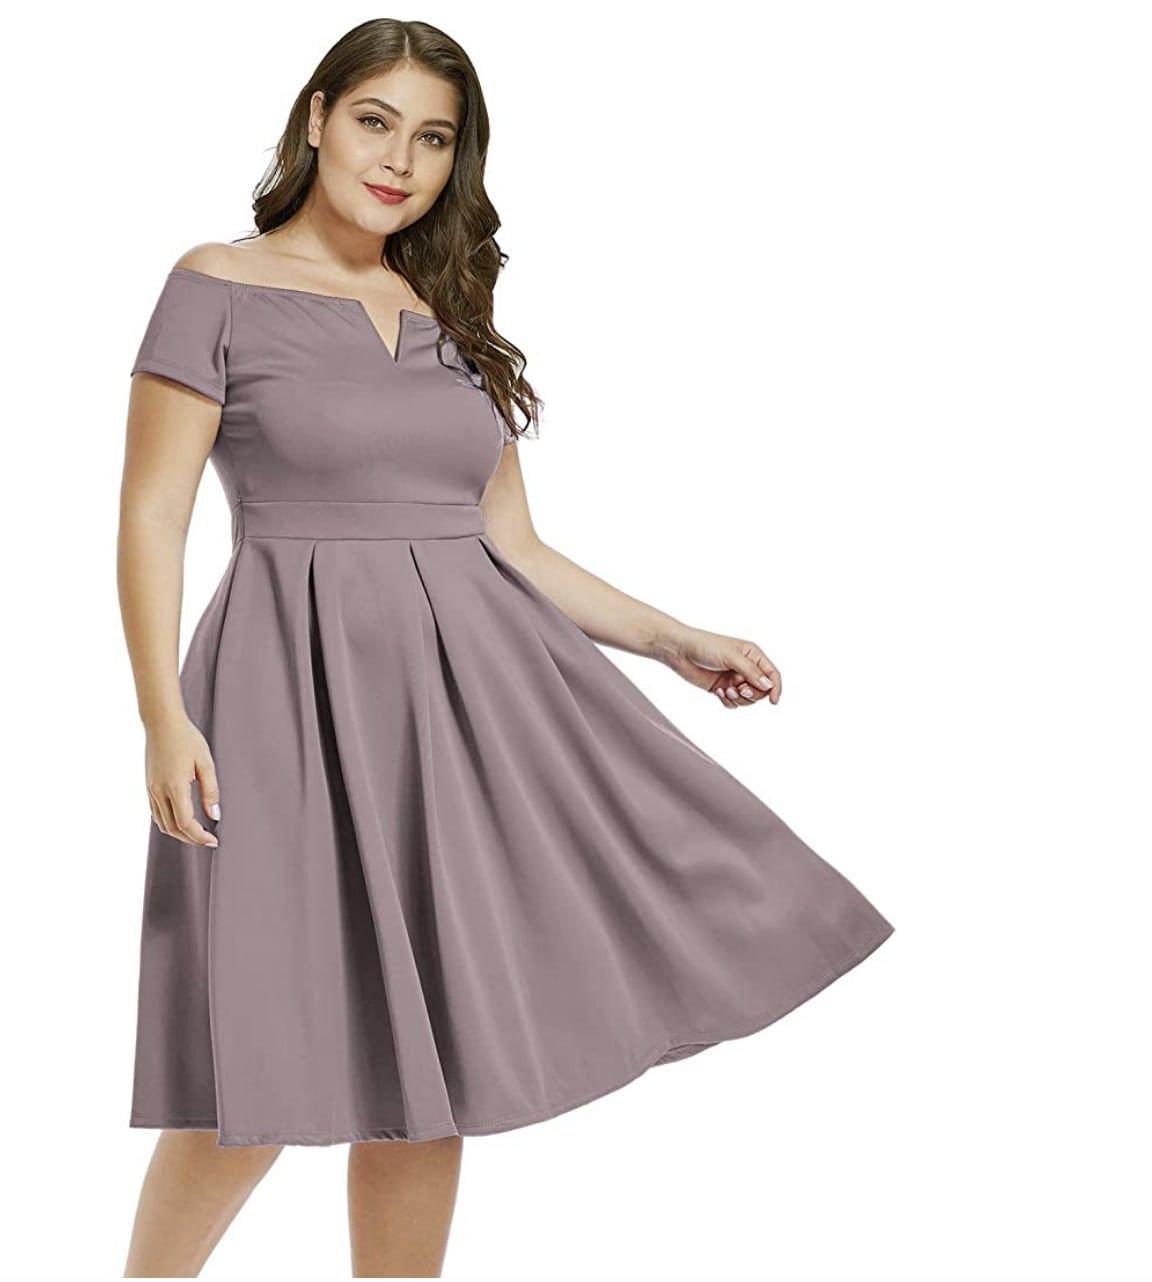 Style B07BPXV9LM Lalagen Plus Size 20 Bridesmaid Purple Cocktail Dress on Queenly